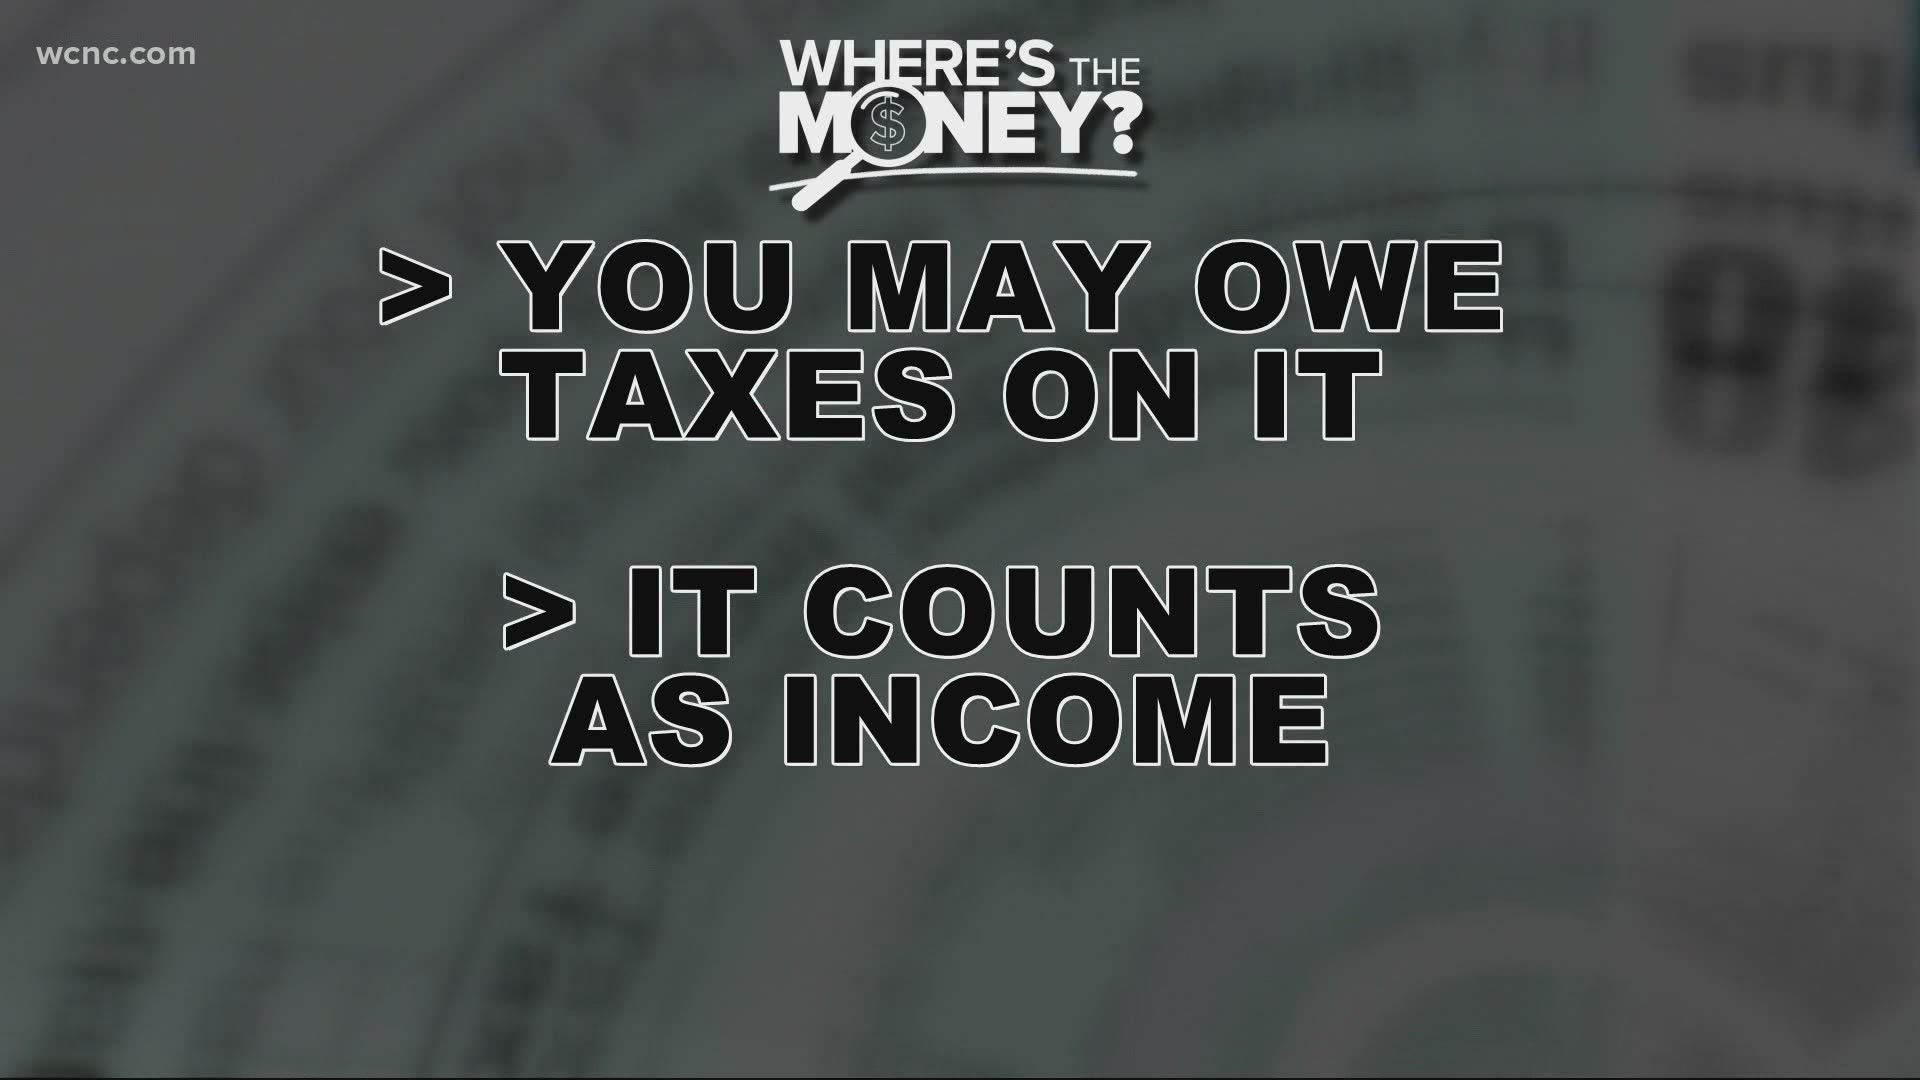 We answer all of your questions to prepare you for tax season.